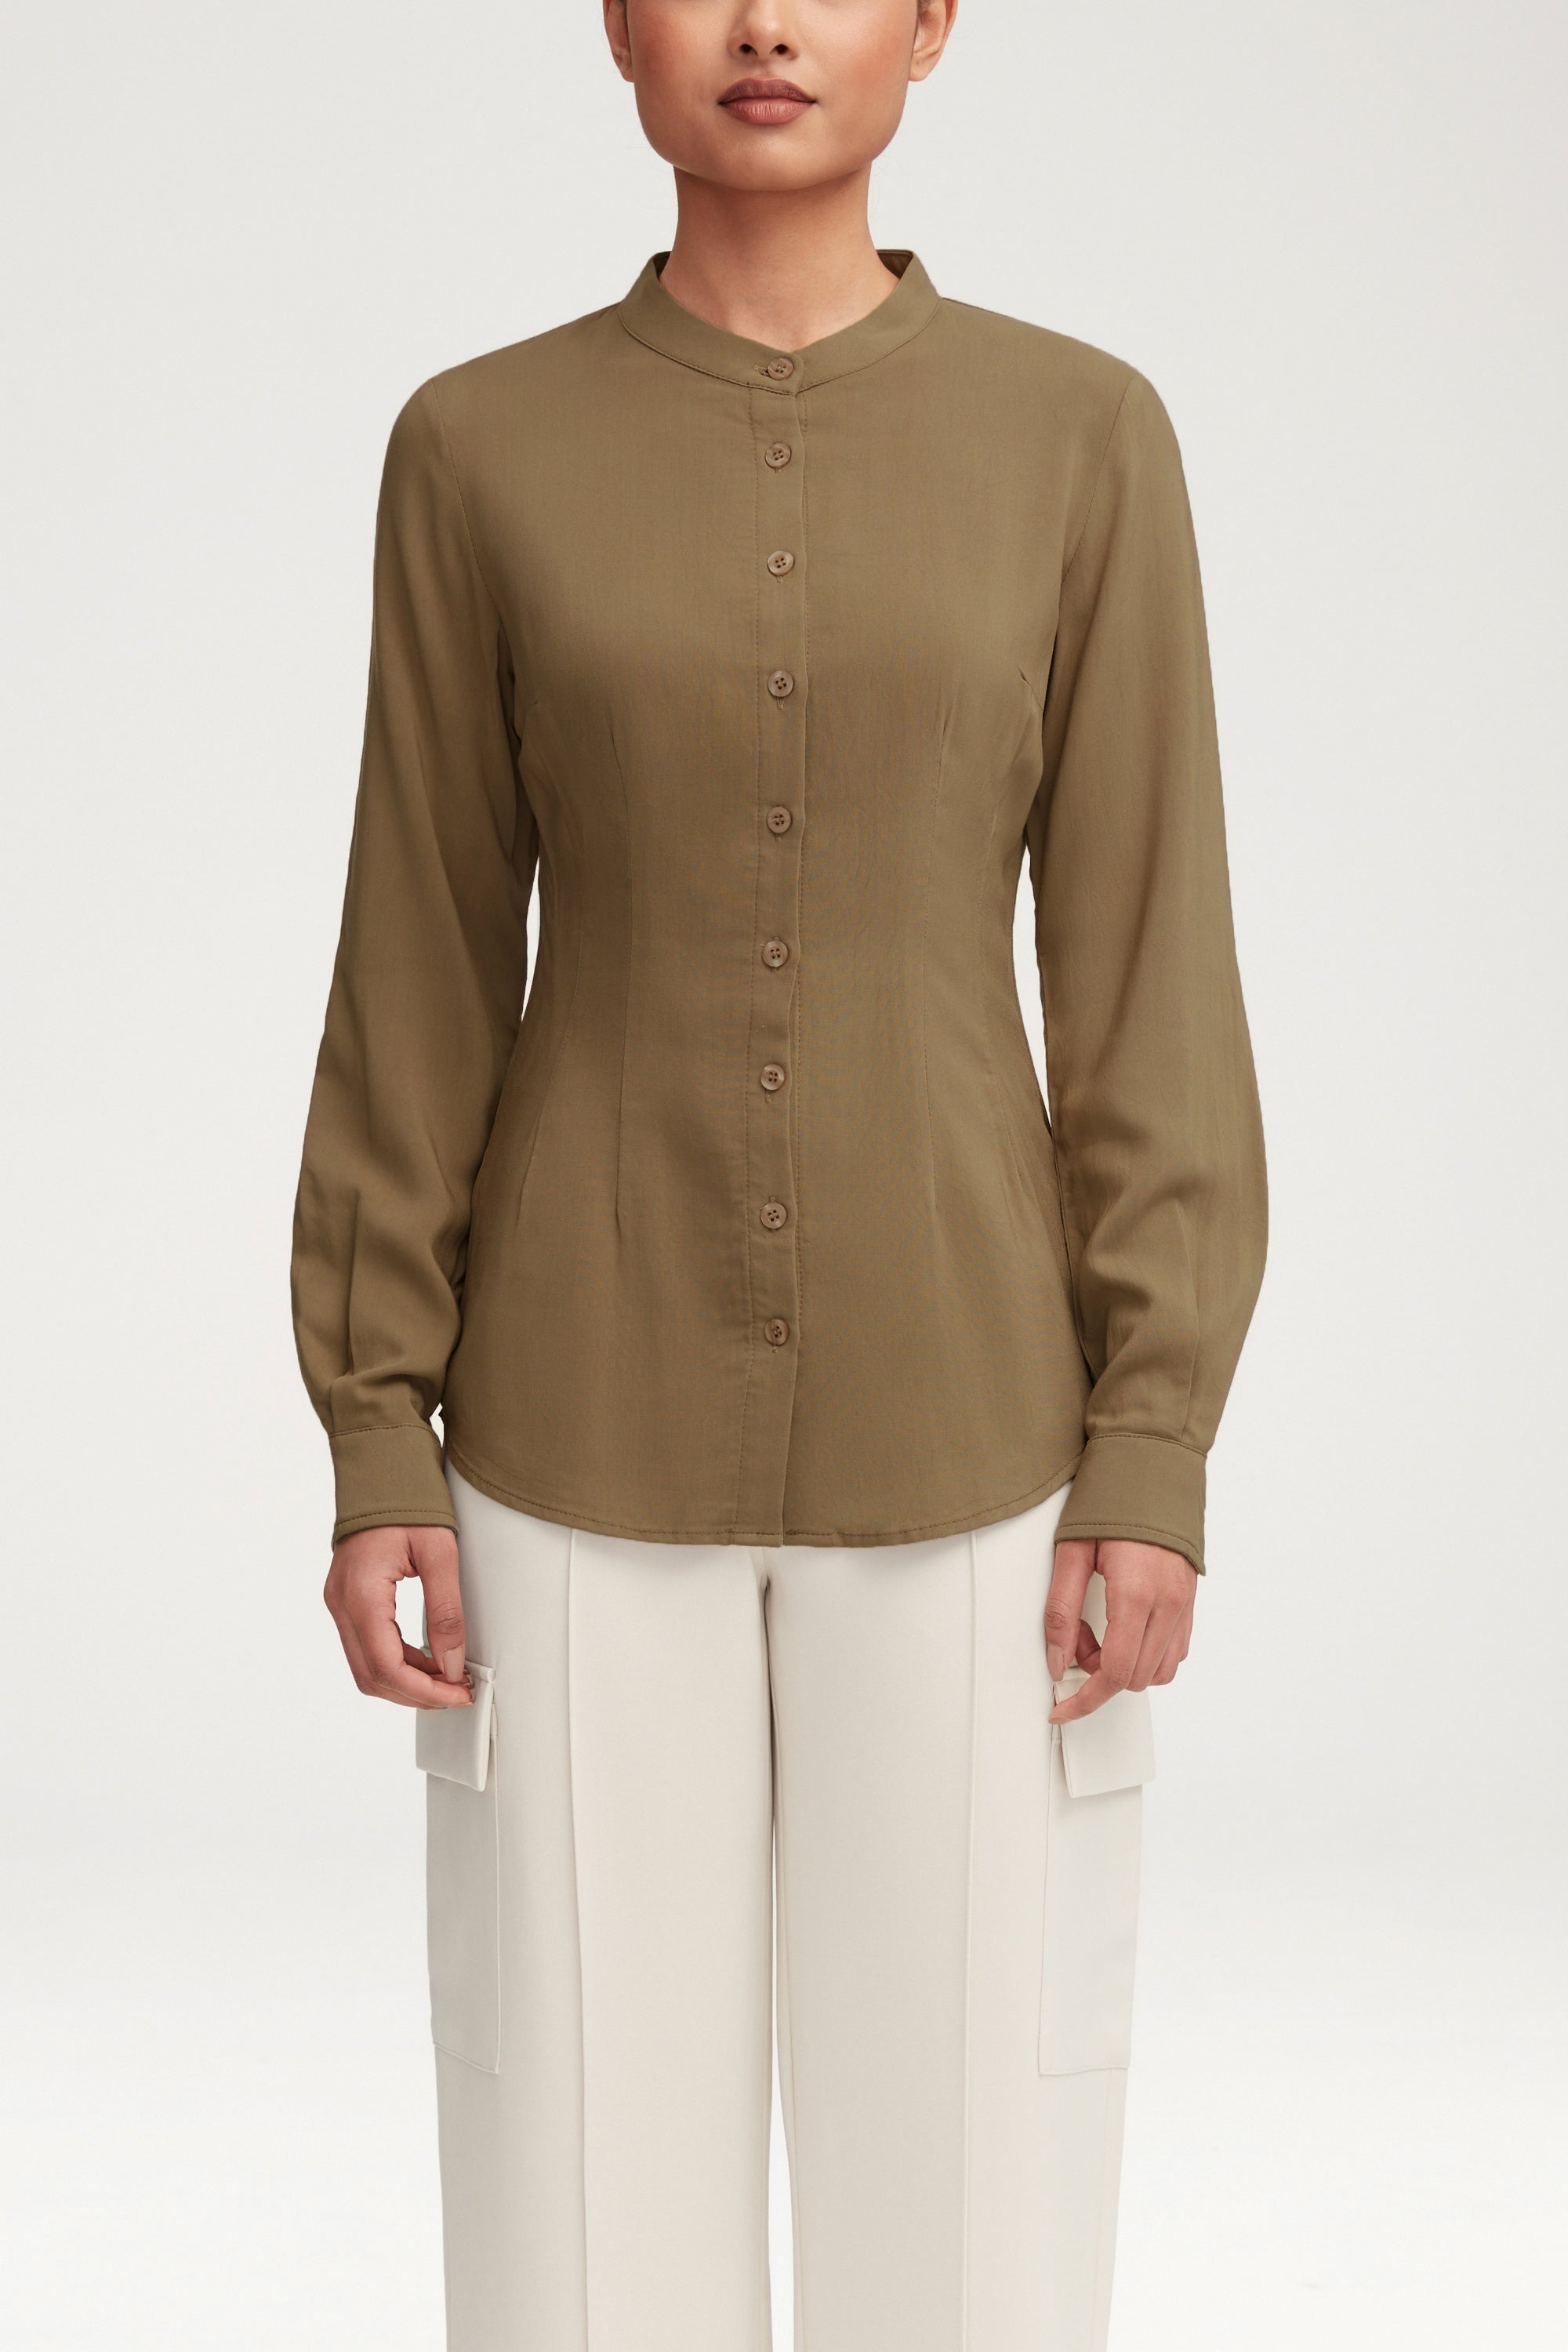 Adina Fitted Button Down Top - Desert Sage Clothing Veiled 